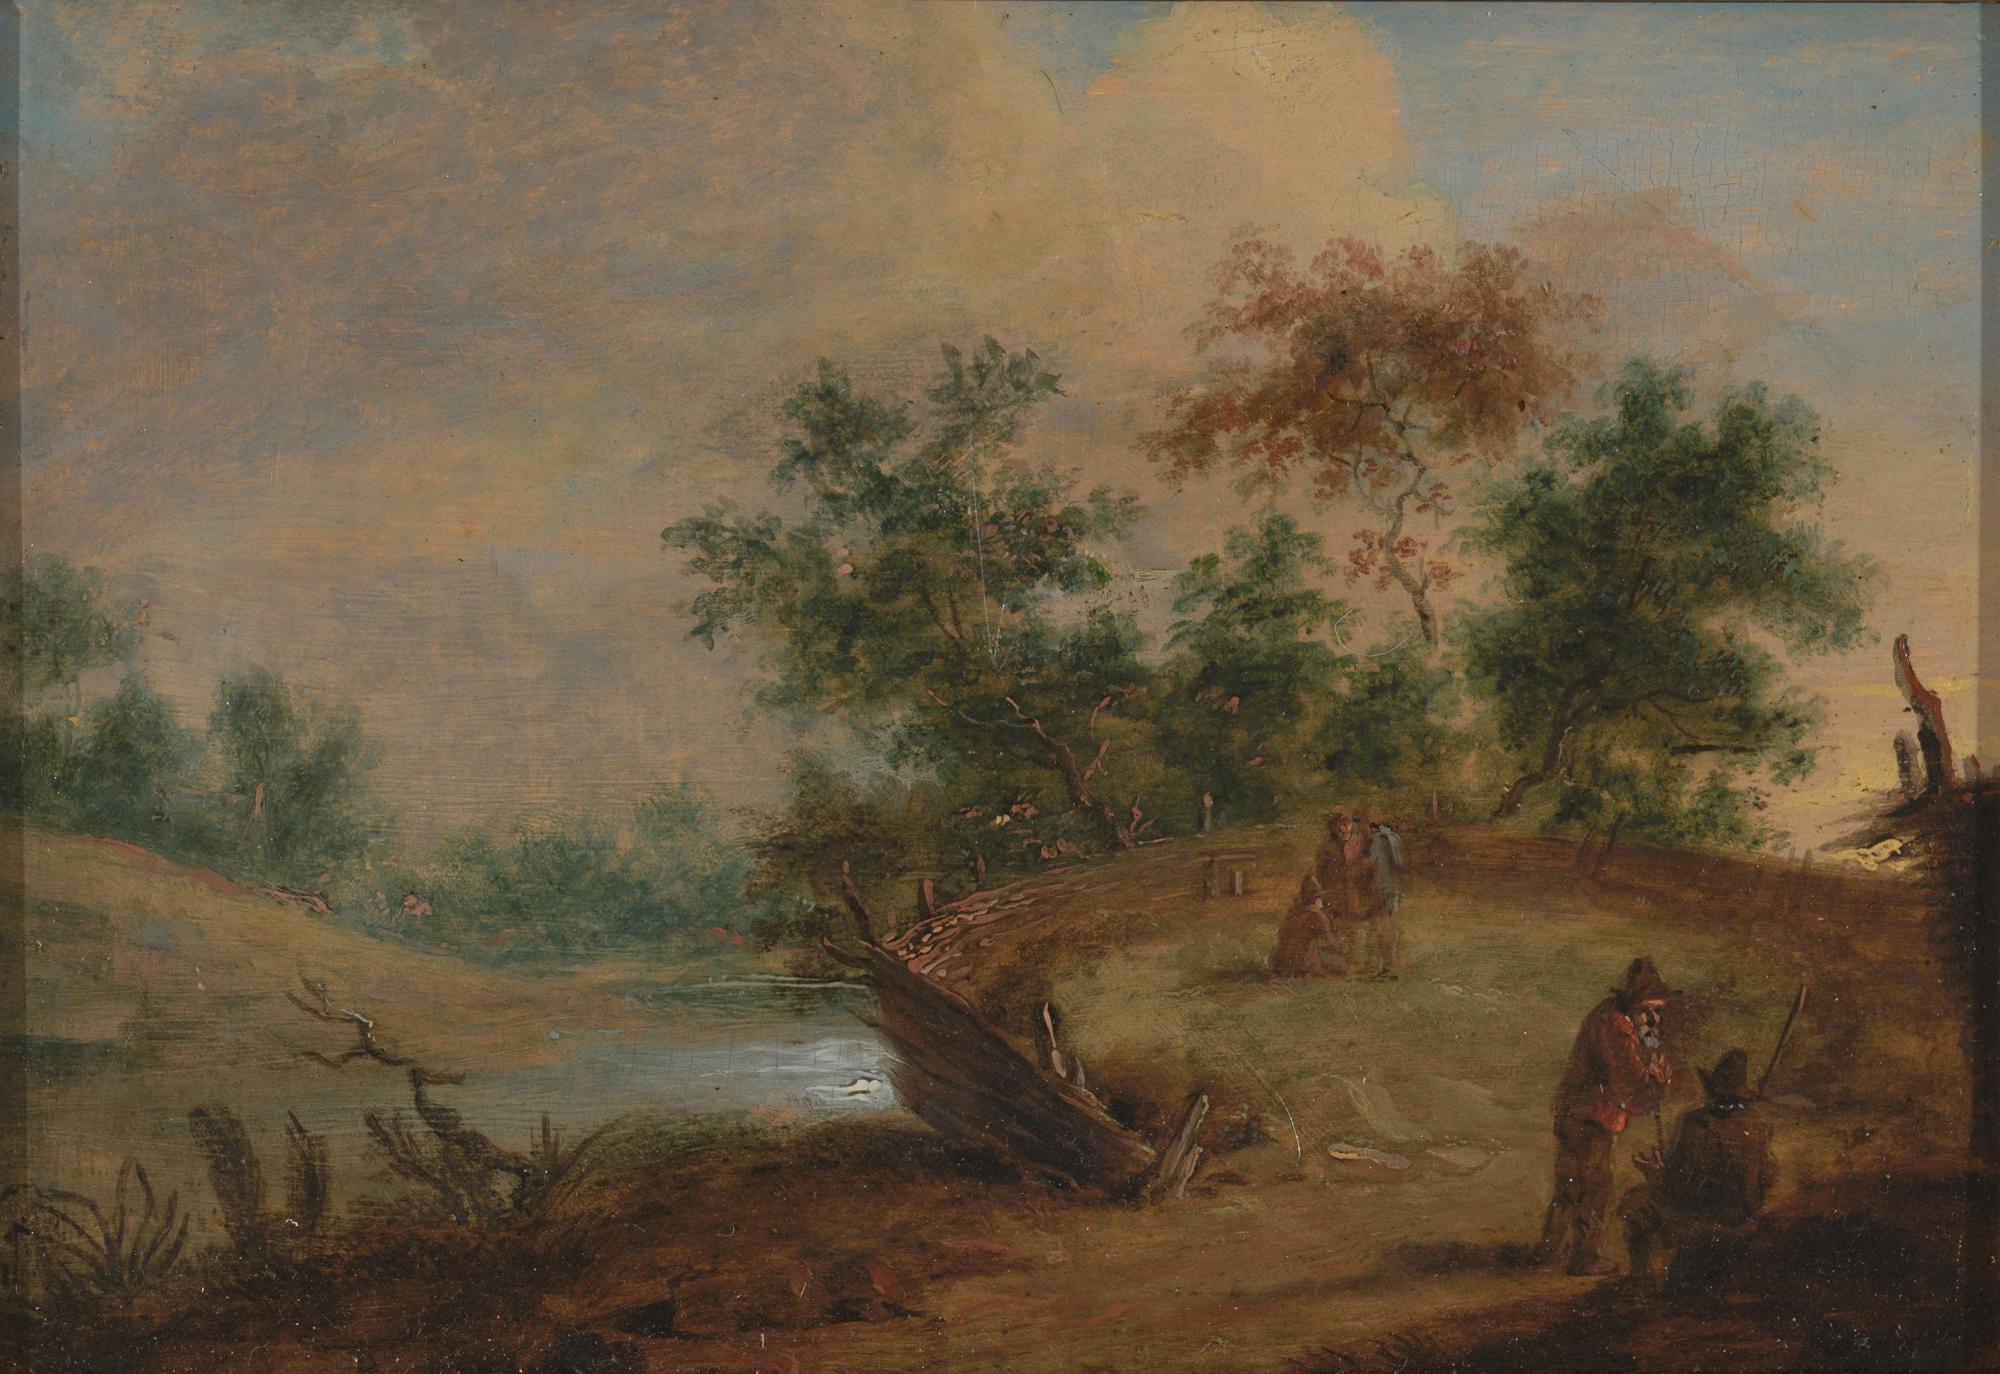 Unknown Figurative Painting - 17th C, Landscape, Flemish School, Countryside with Figures at a Small River